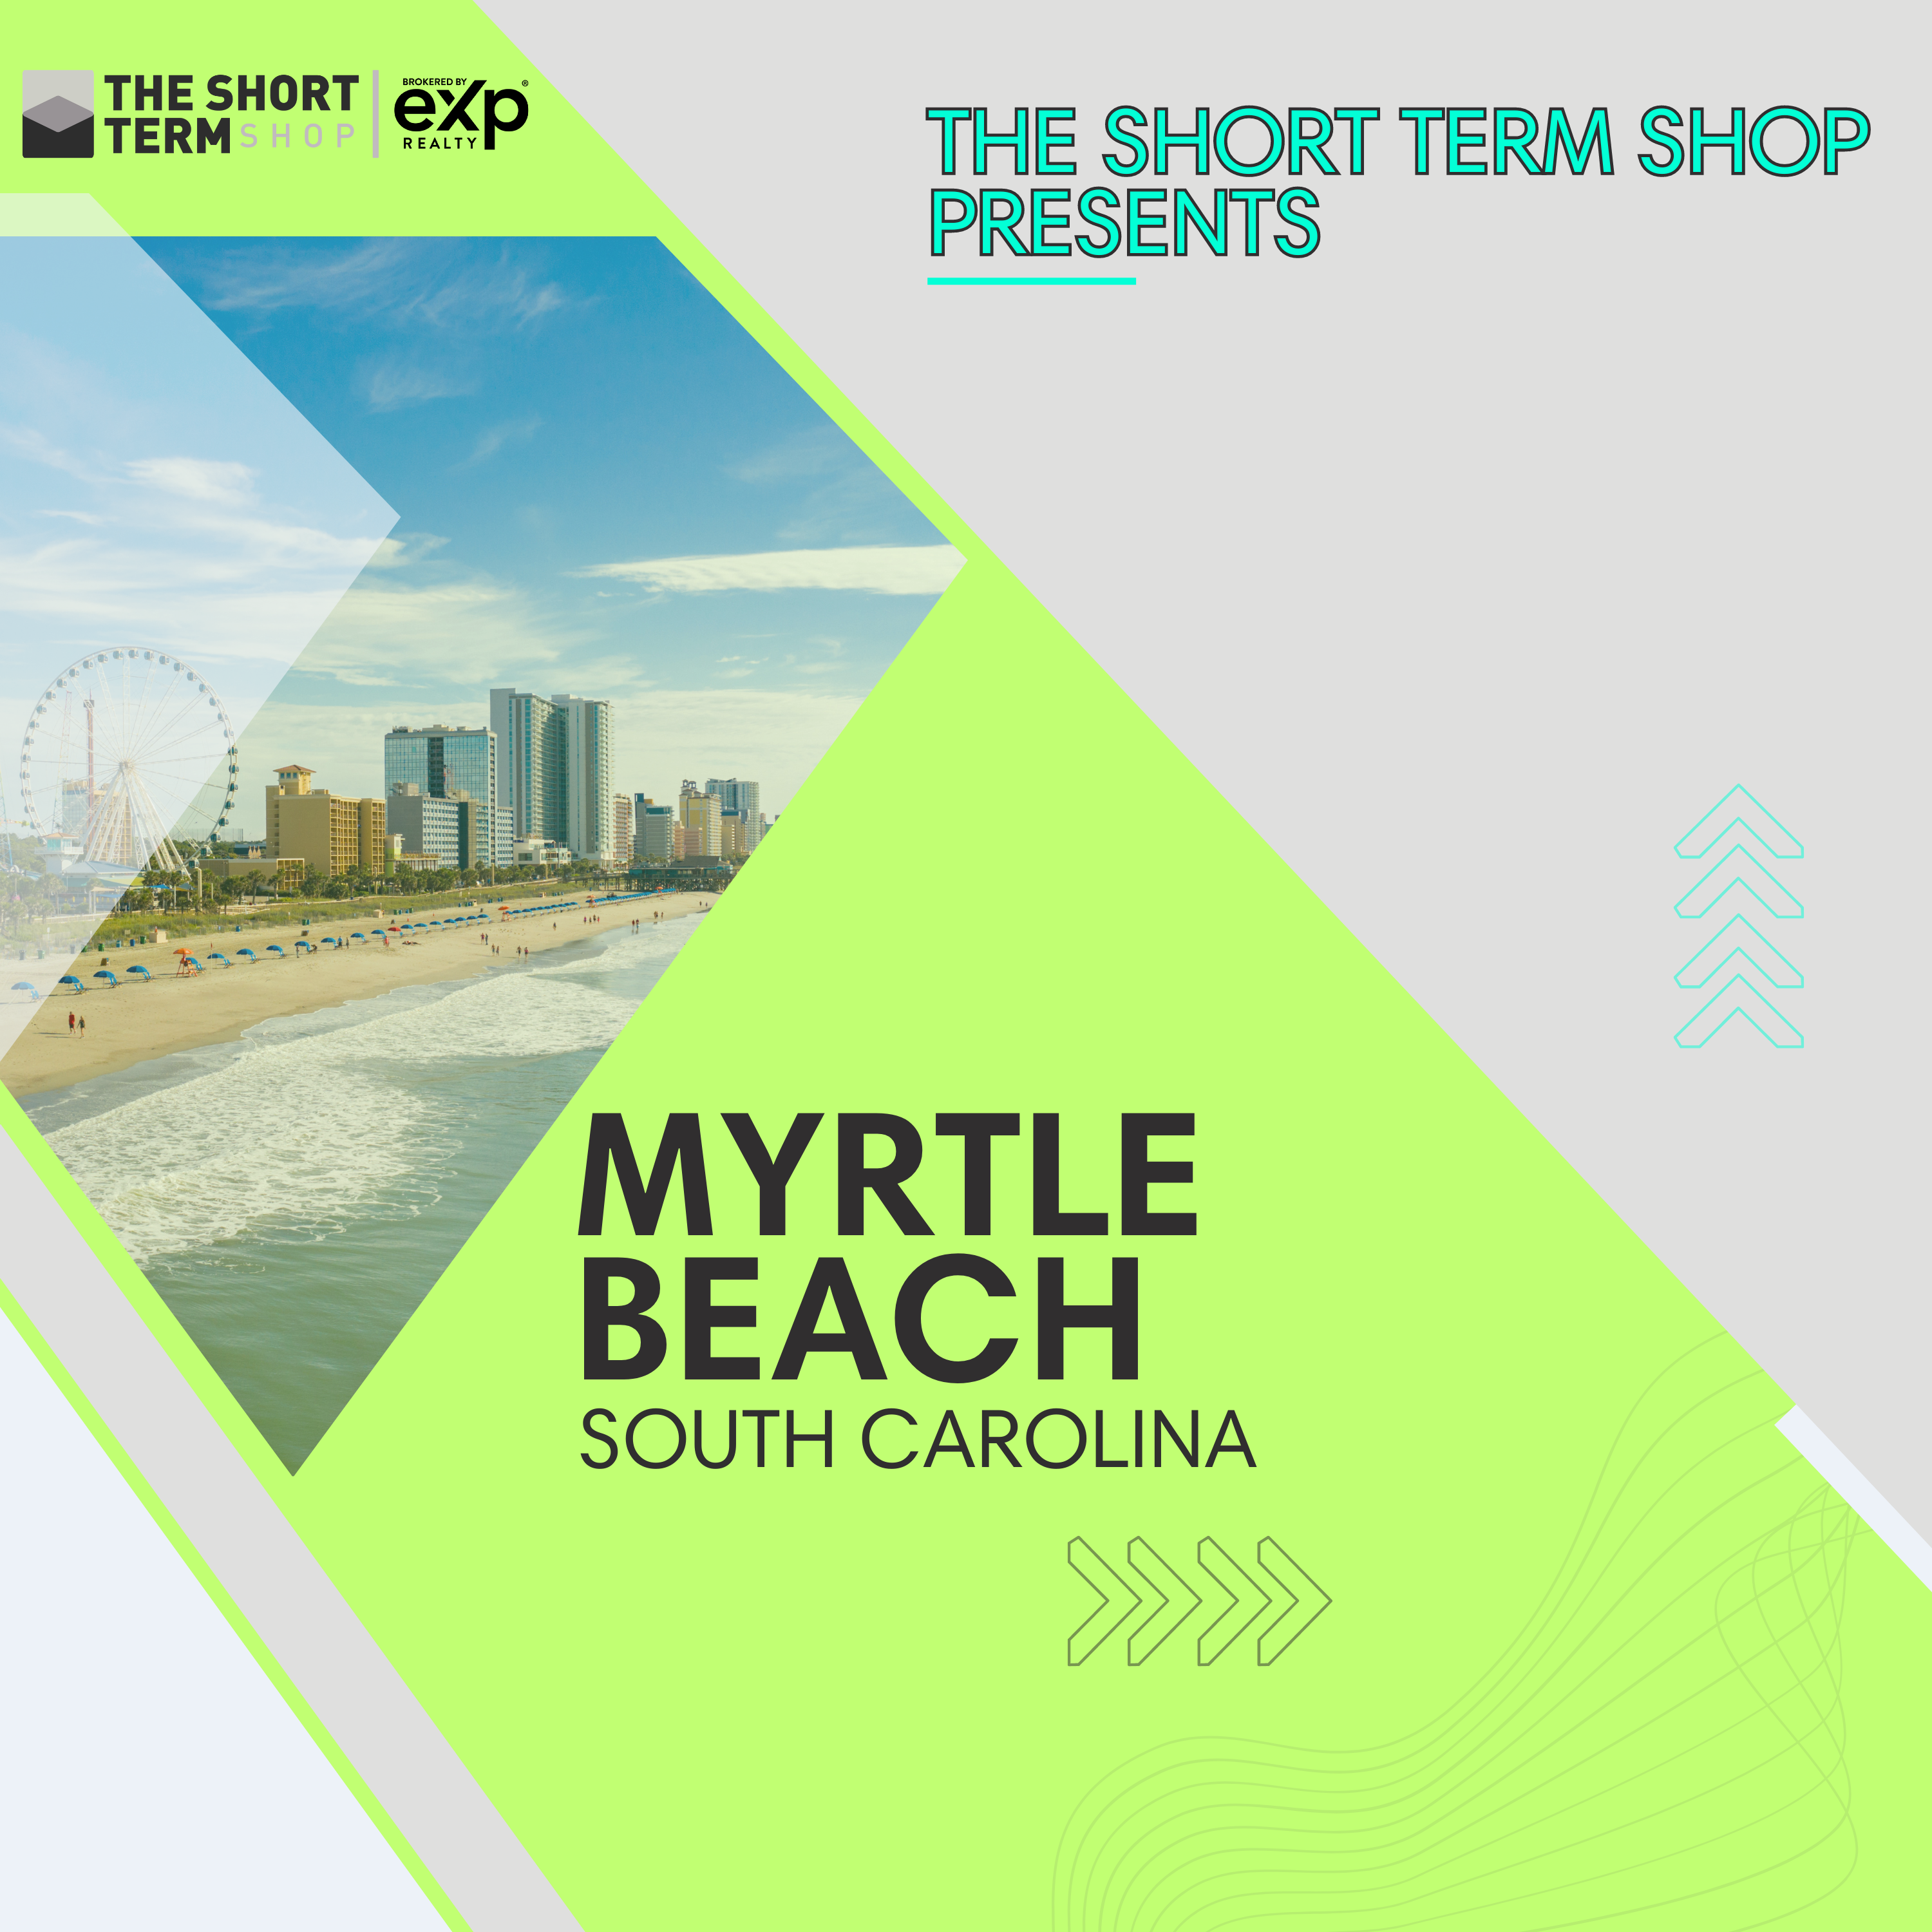 Buying an Airbnb in Myrtle Beach, South Carolina